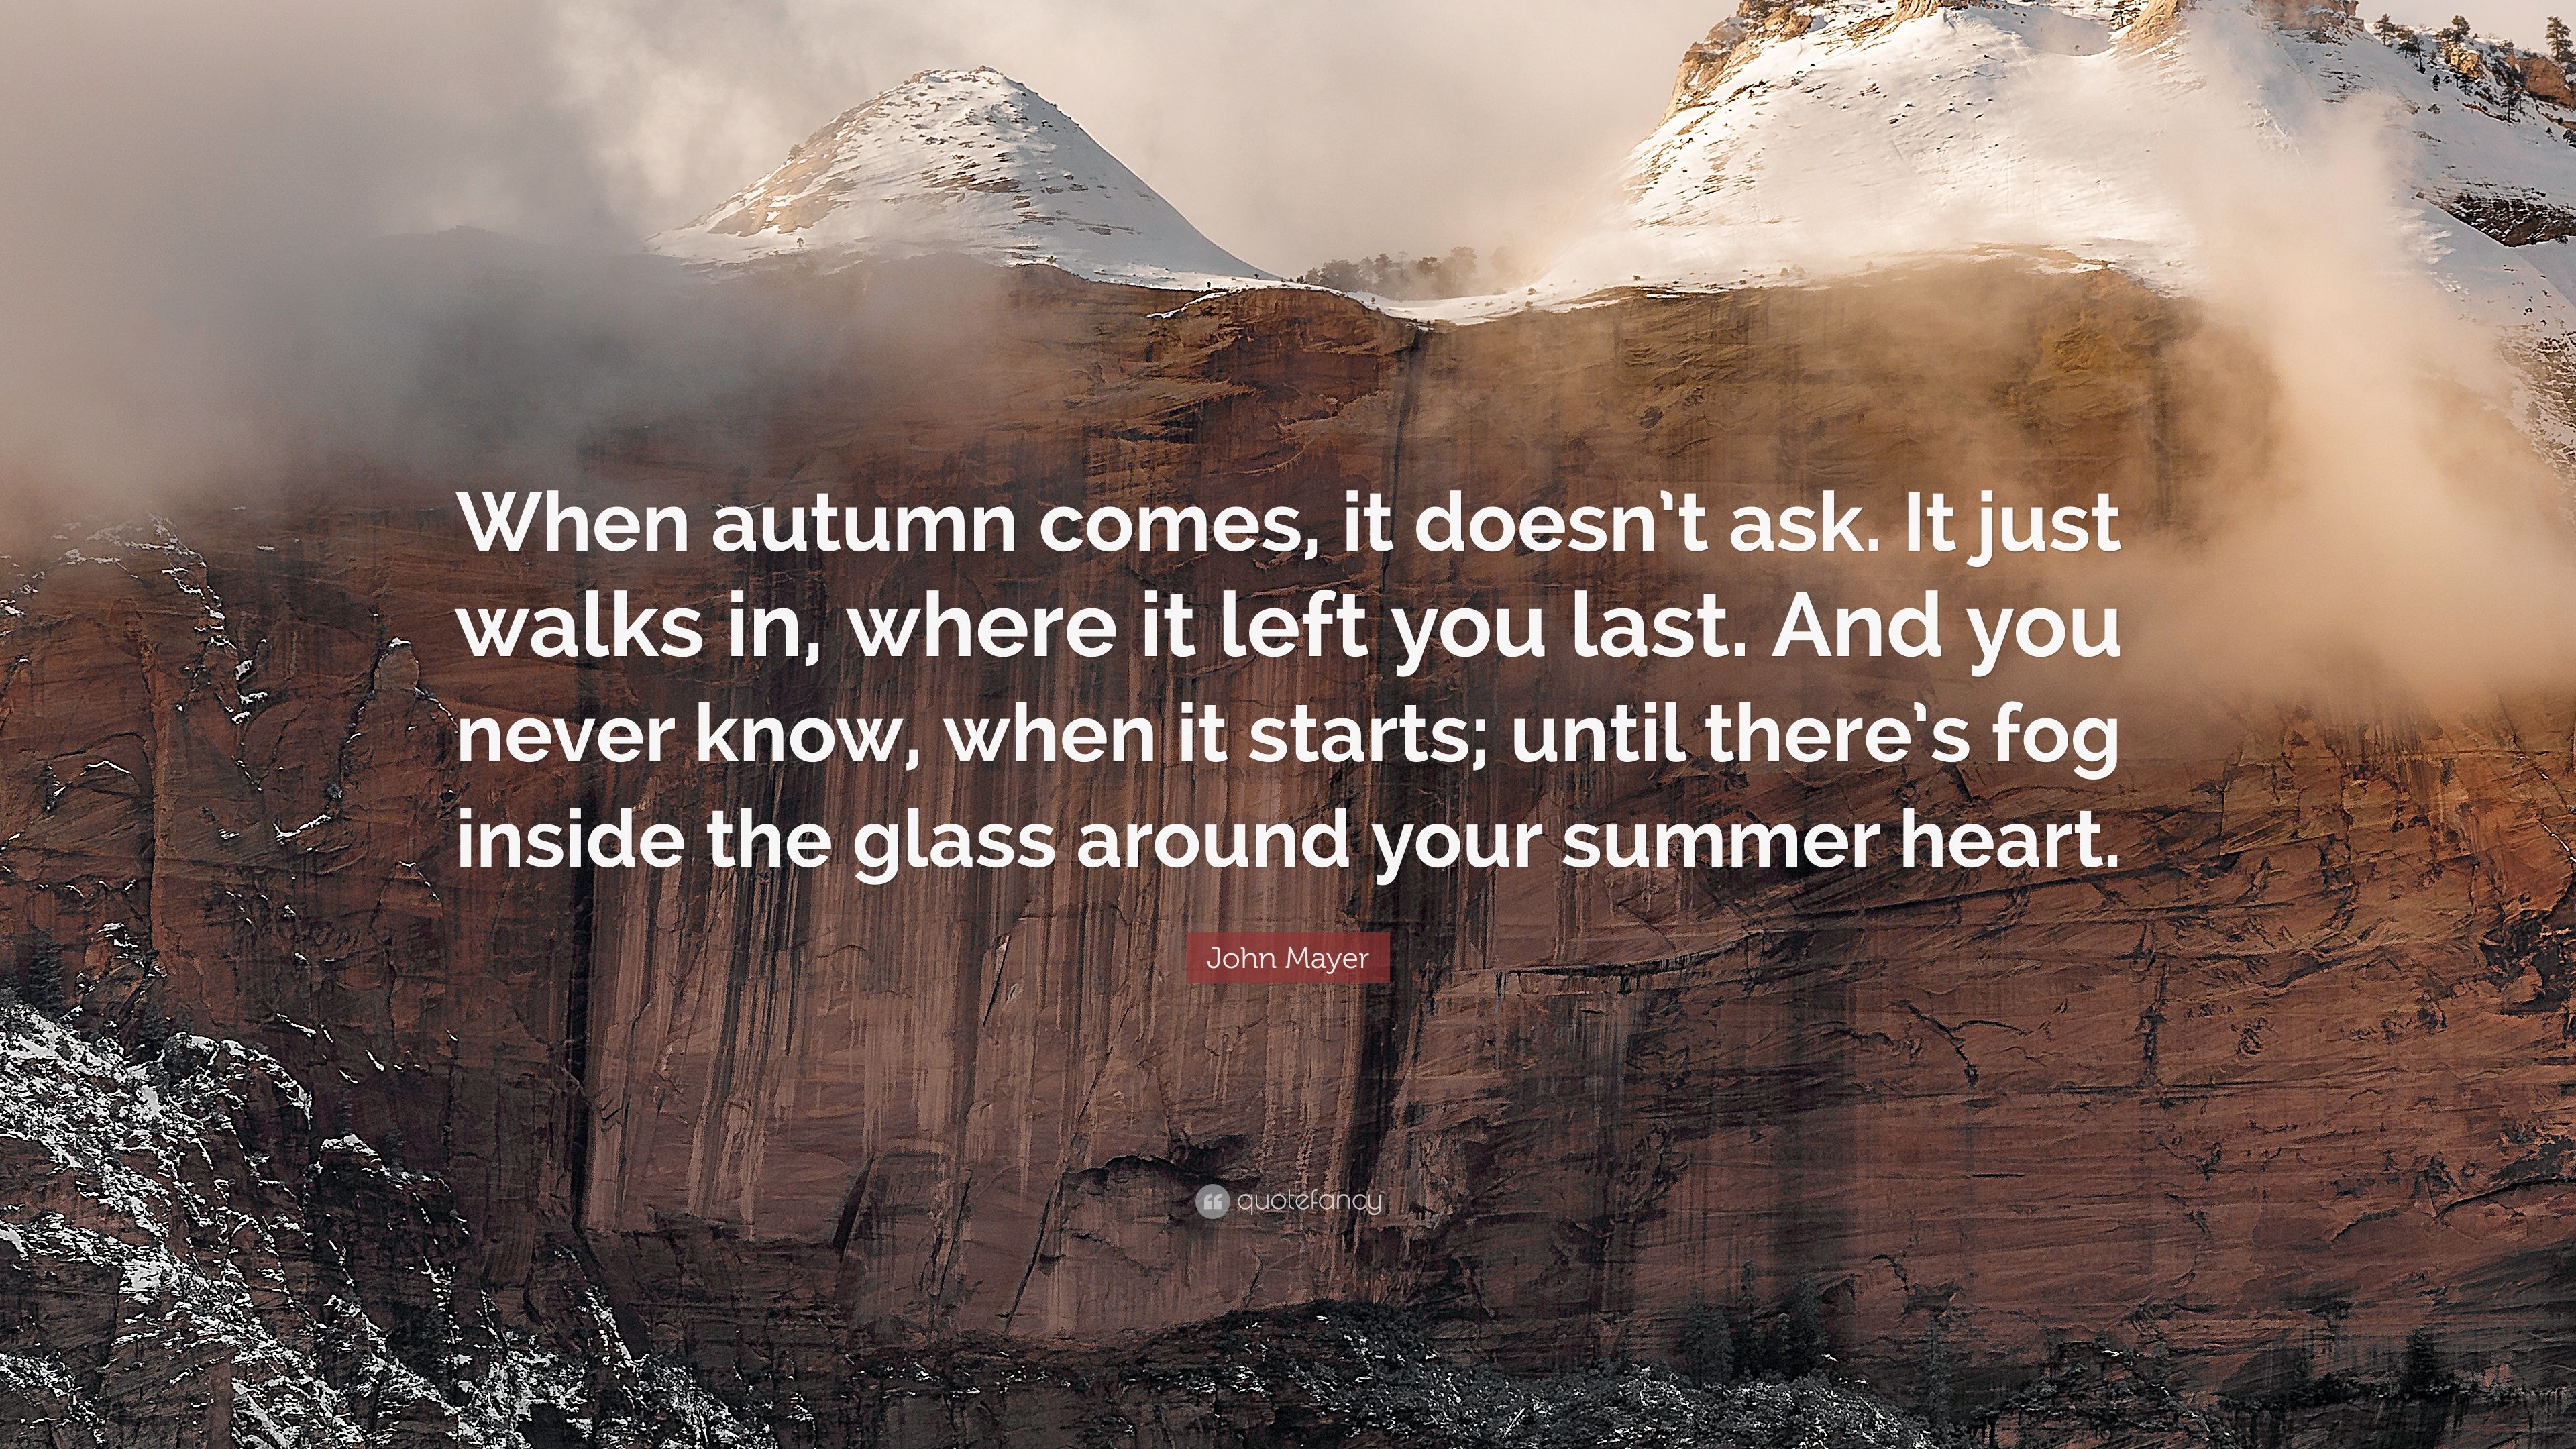 John Mayer Quote: “When autumn comes, it doesn't ask. It just walks ...